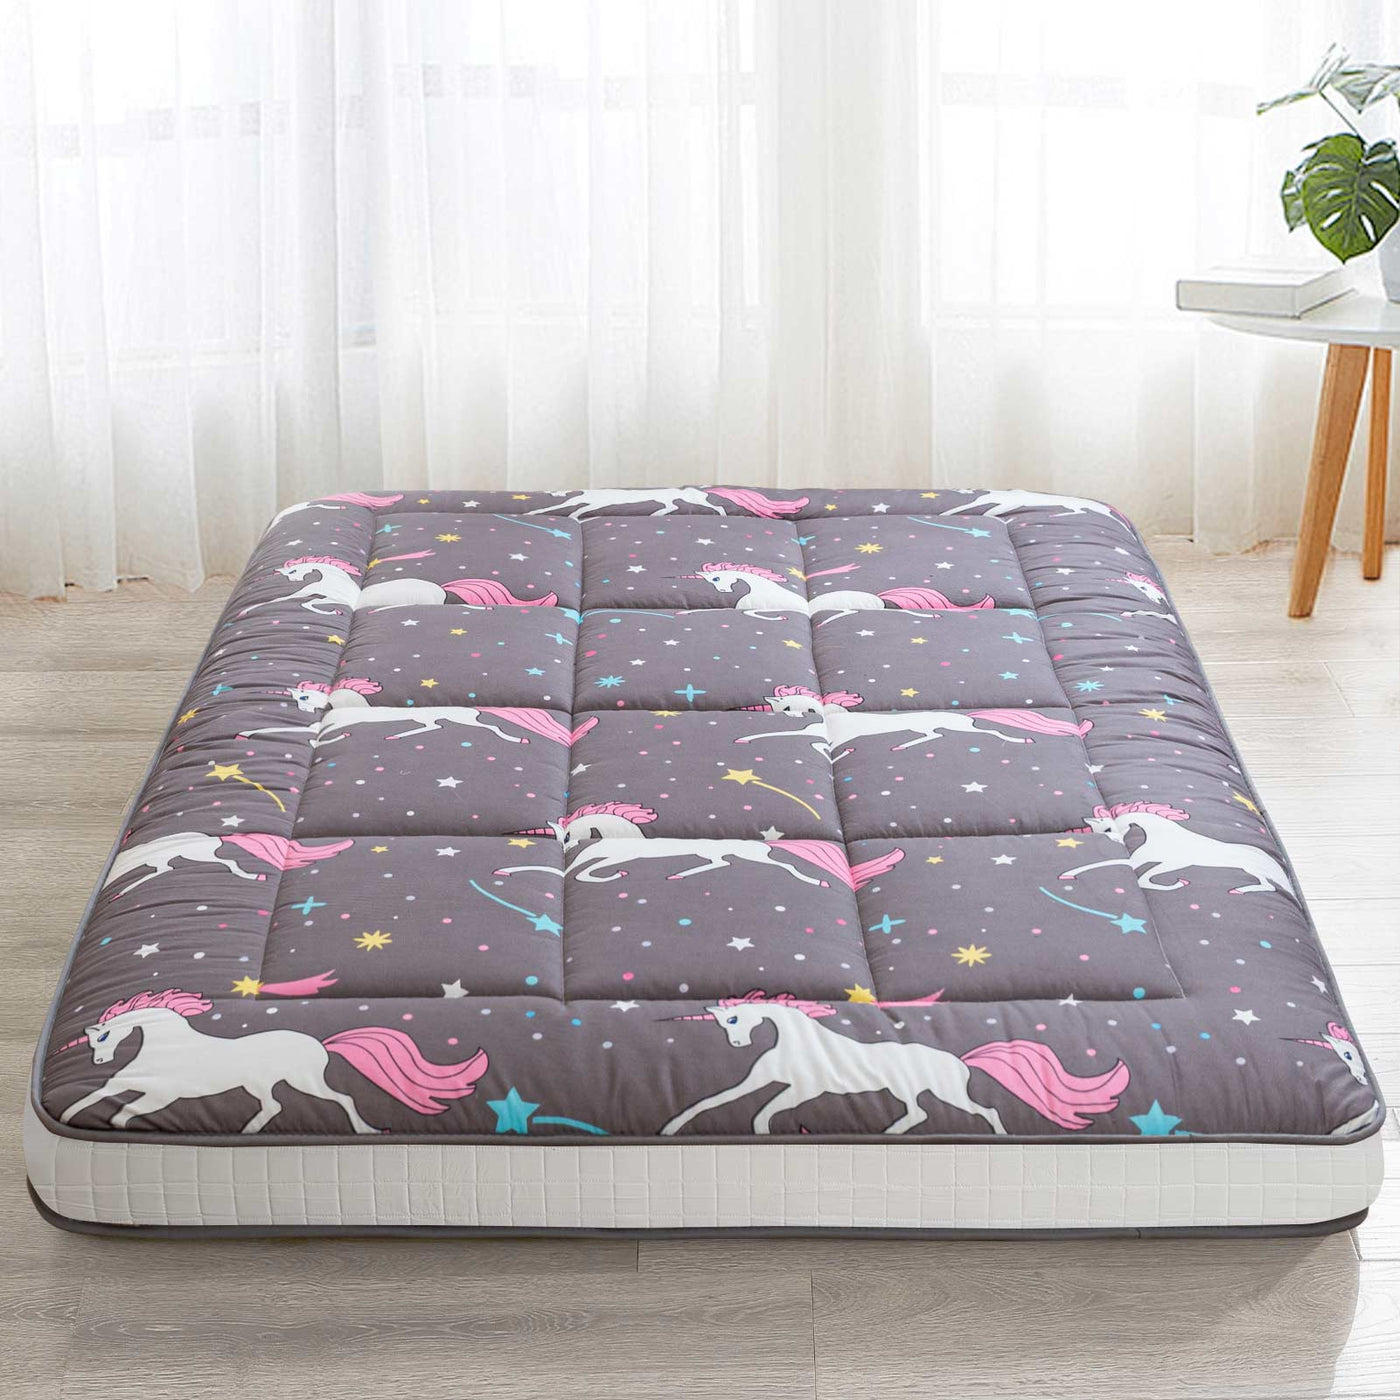 MAXYOYO Unicorn Pattern Padded Japanese Floor Mattress, Extra Thick Folding Sleeping Pad for Camping Couch